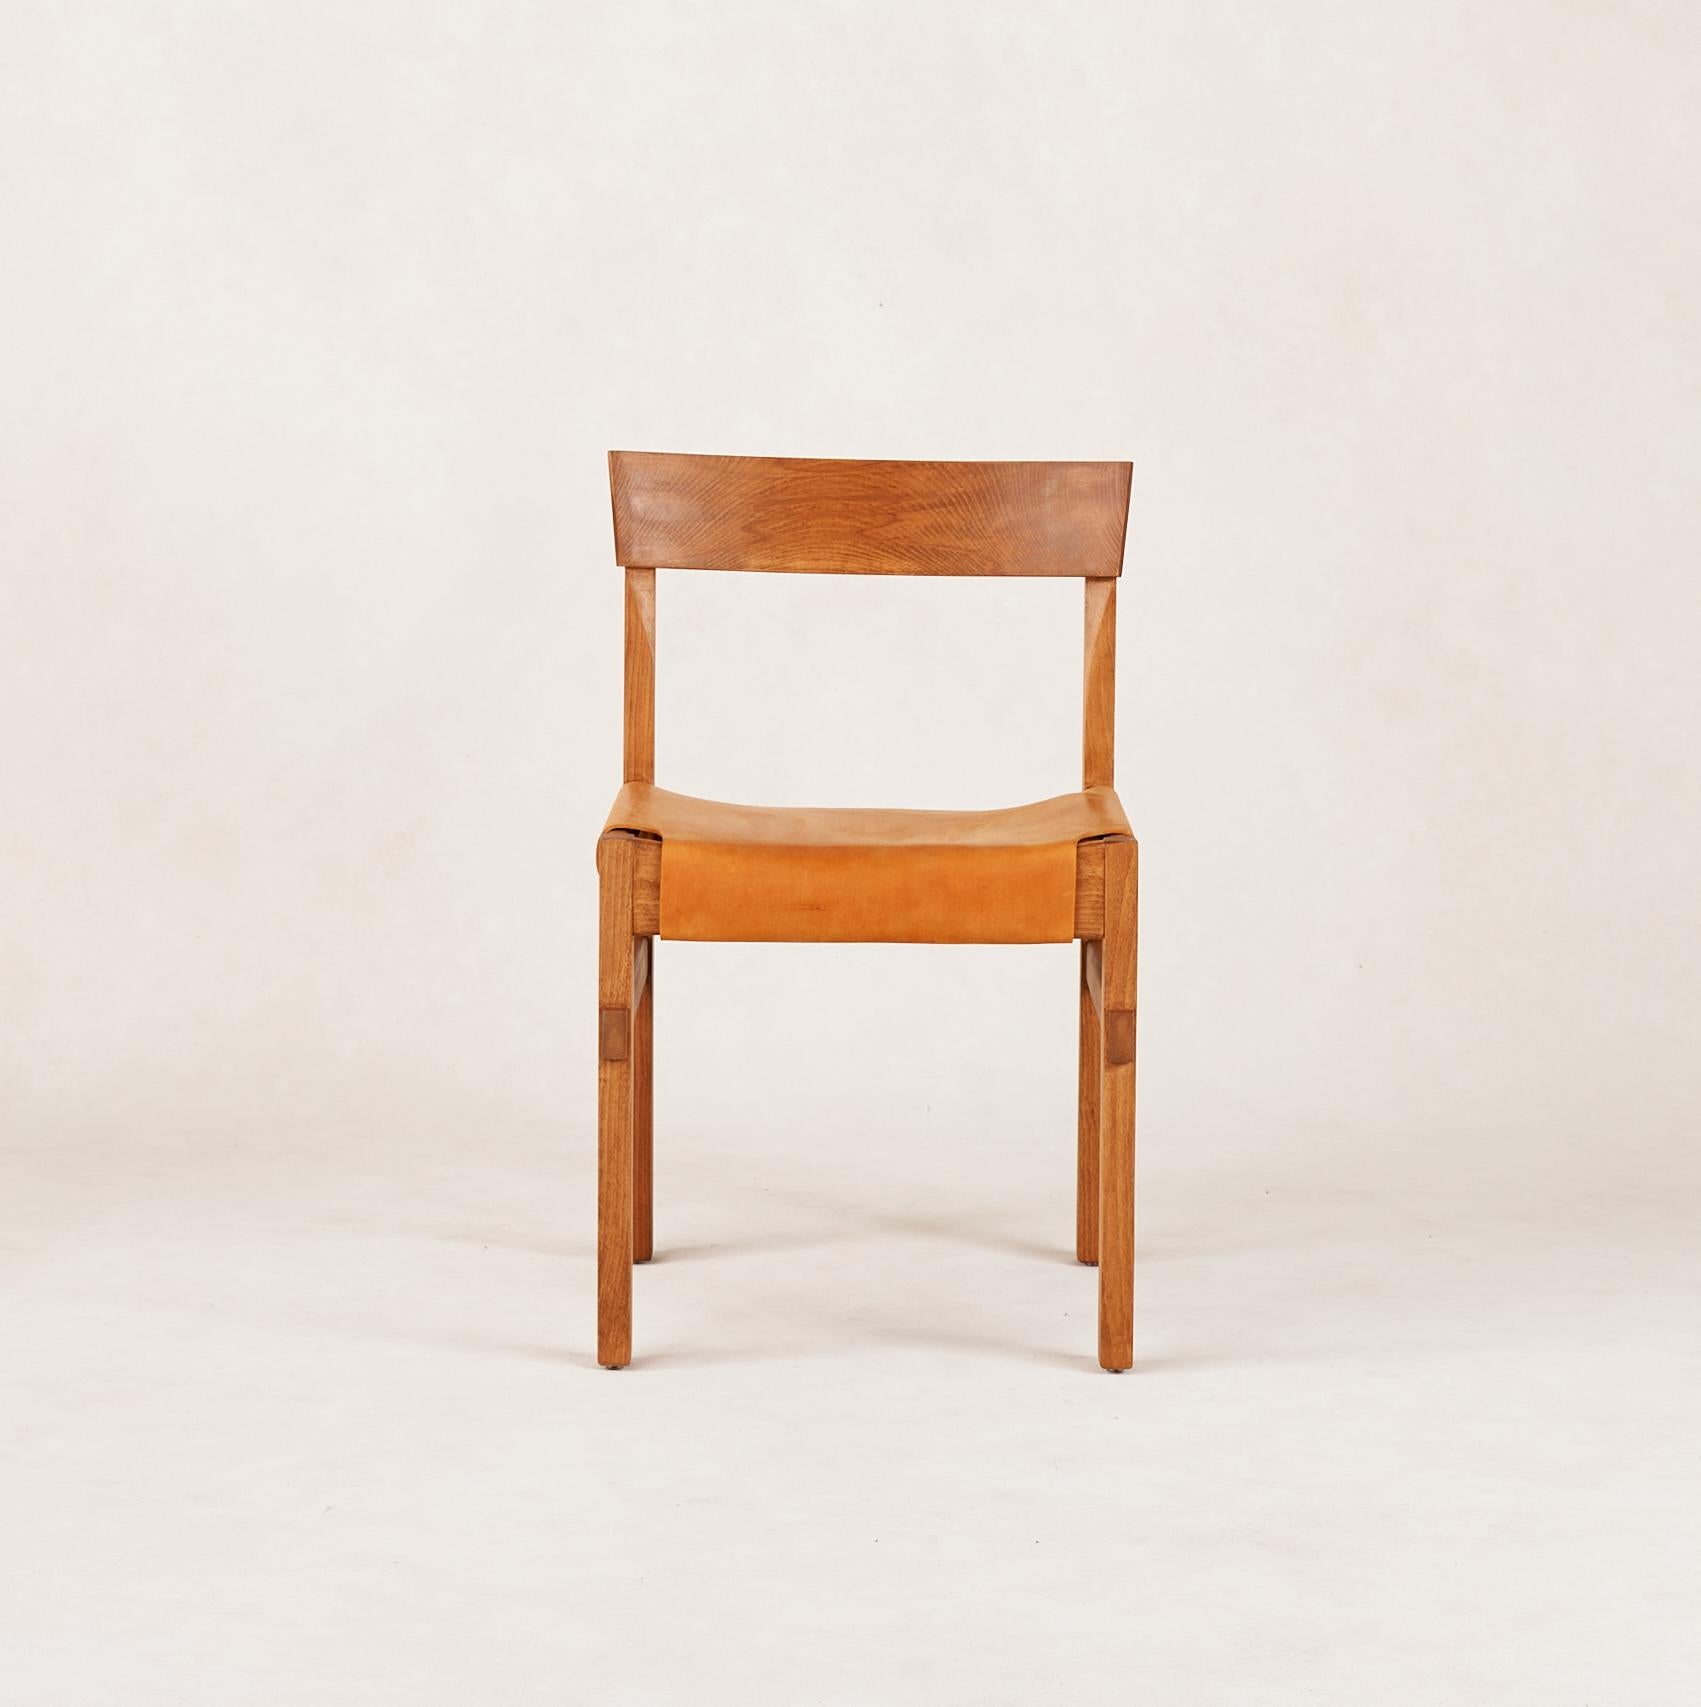 The Shinto Dining Chair was designed as an ode to the traditional Japanese Torii Gate found at the entrances of Shinto shrines. The chair invites you to pause, find peace in the moment and come together with friends and family around the dining